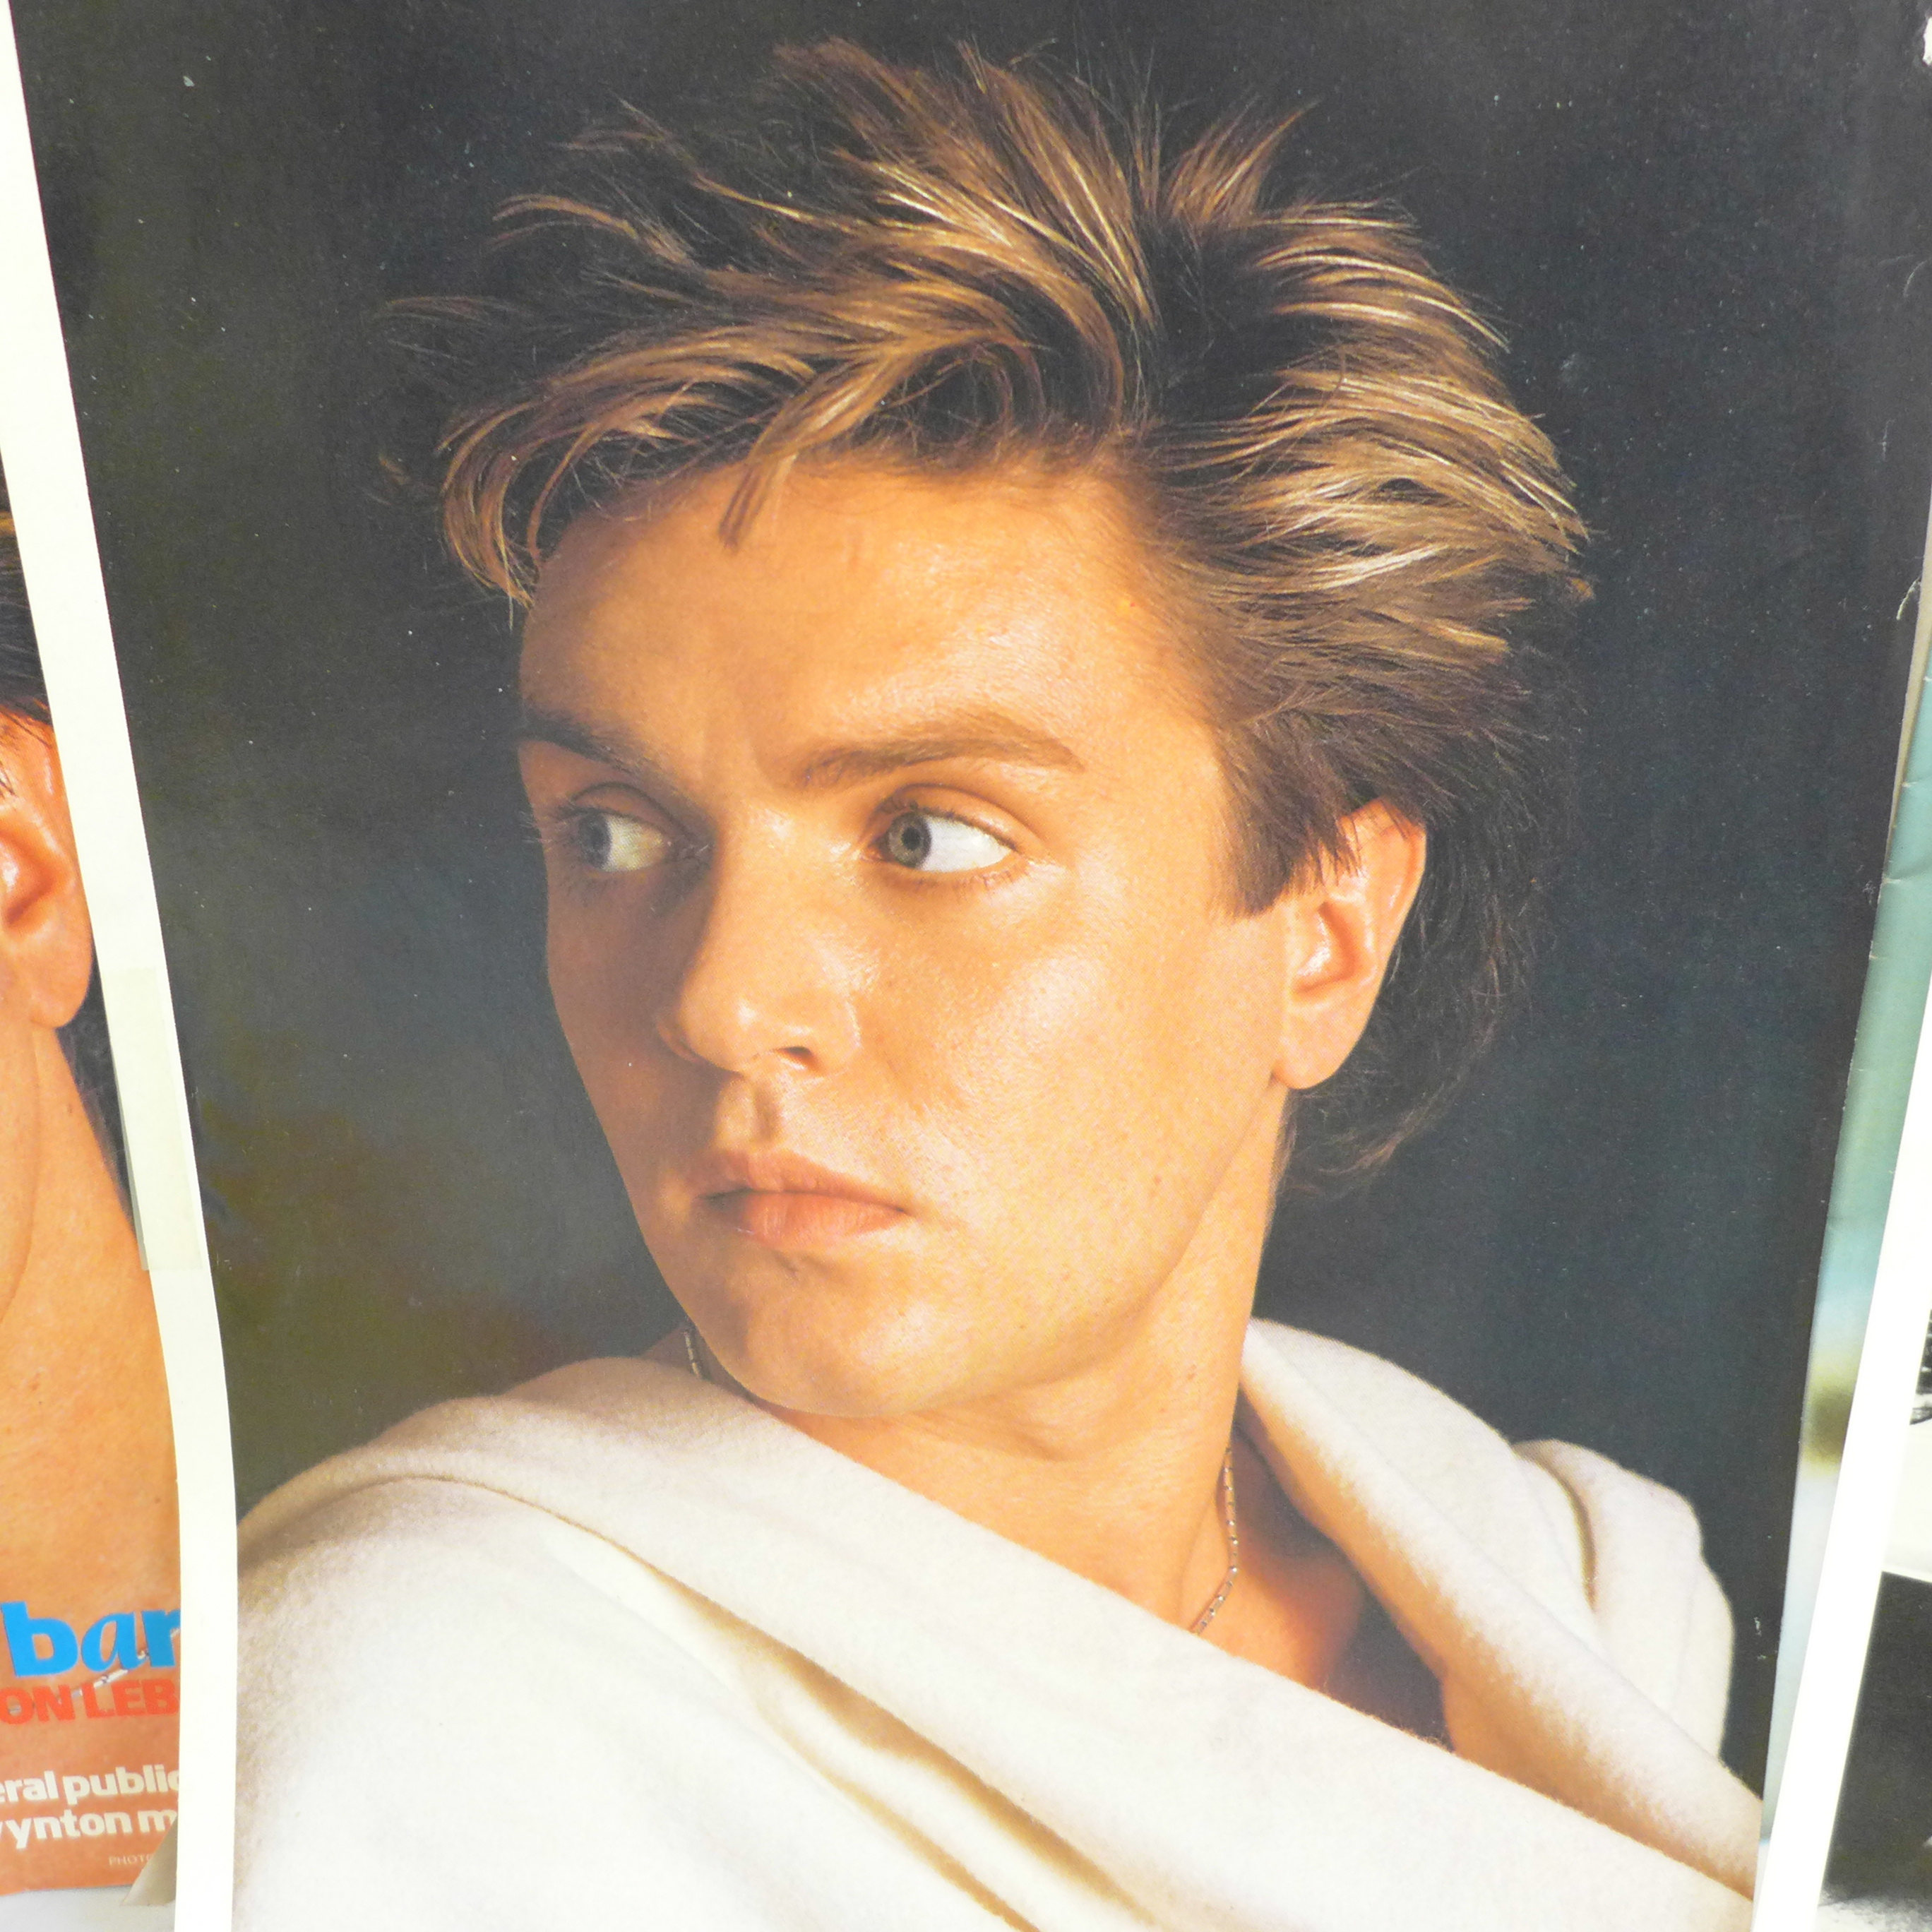 Duran Duran memorabilia including singles, posters, a book and fan club newsletters - Image 3 of 6